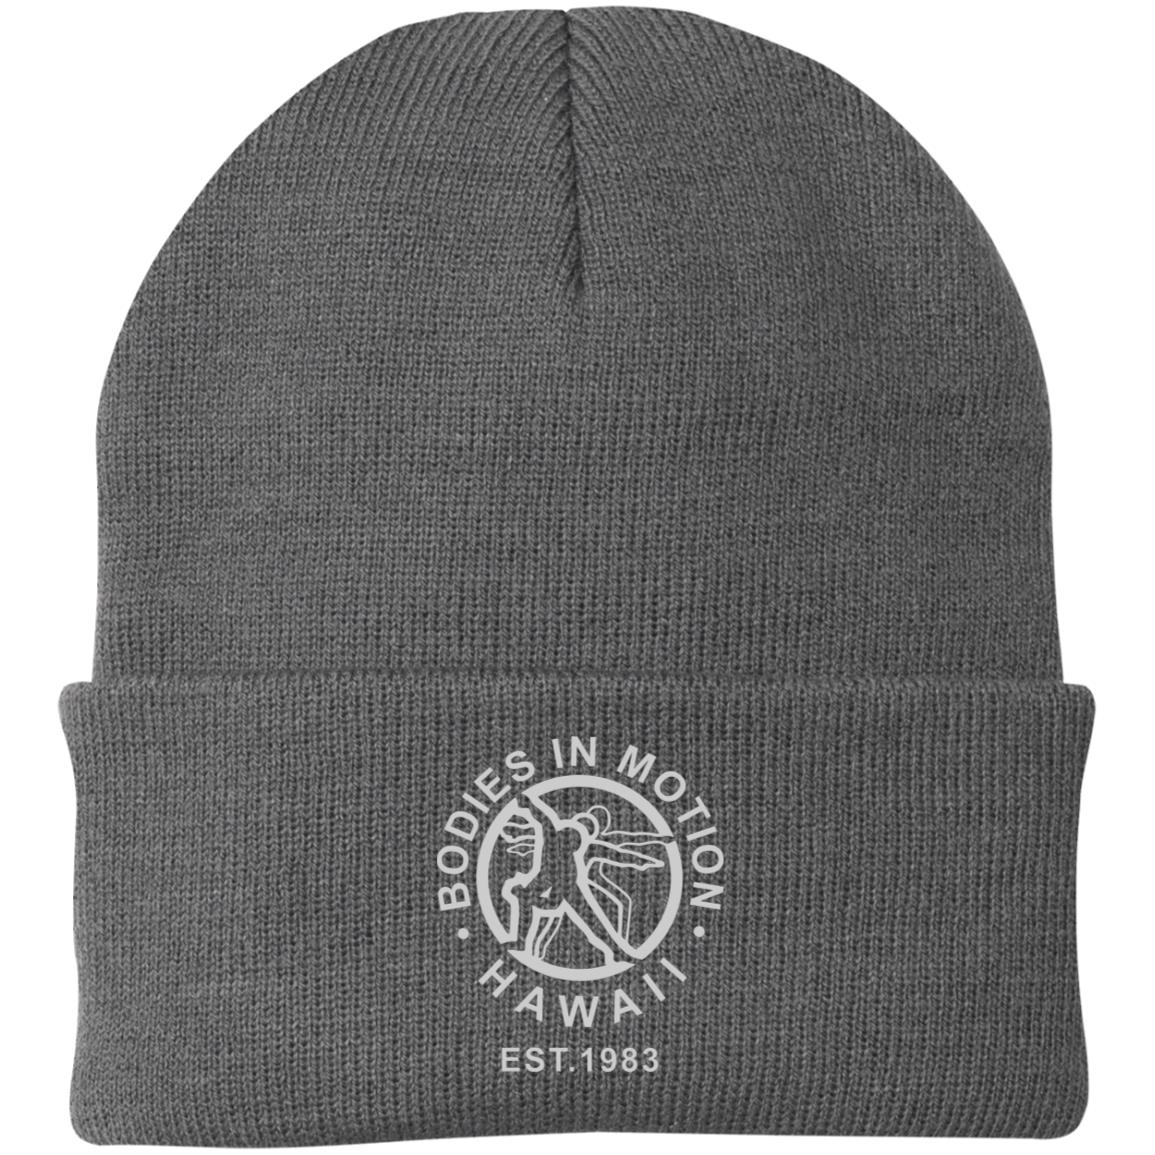 Bodies in Motions Embroidered Knit Cap